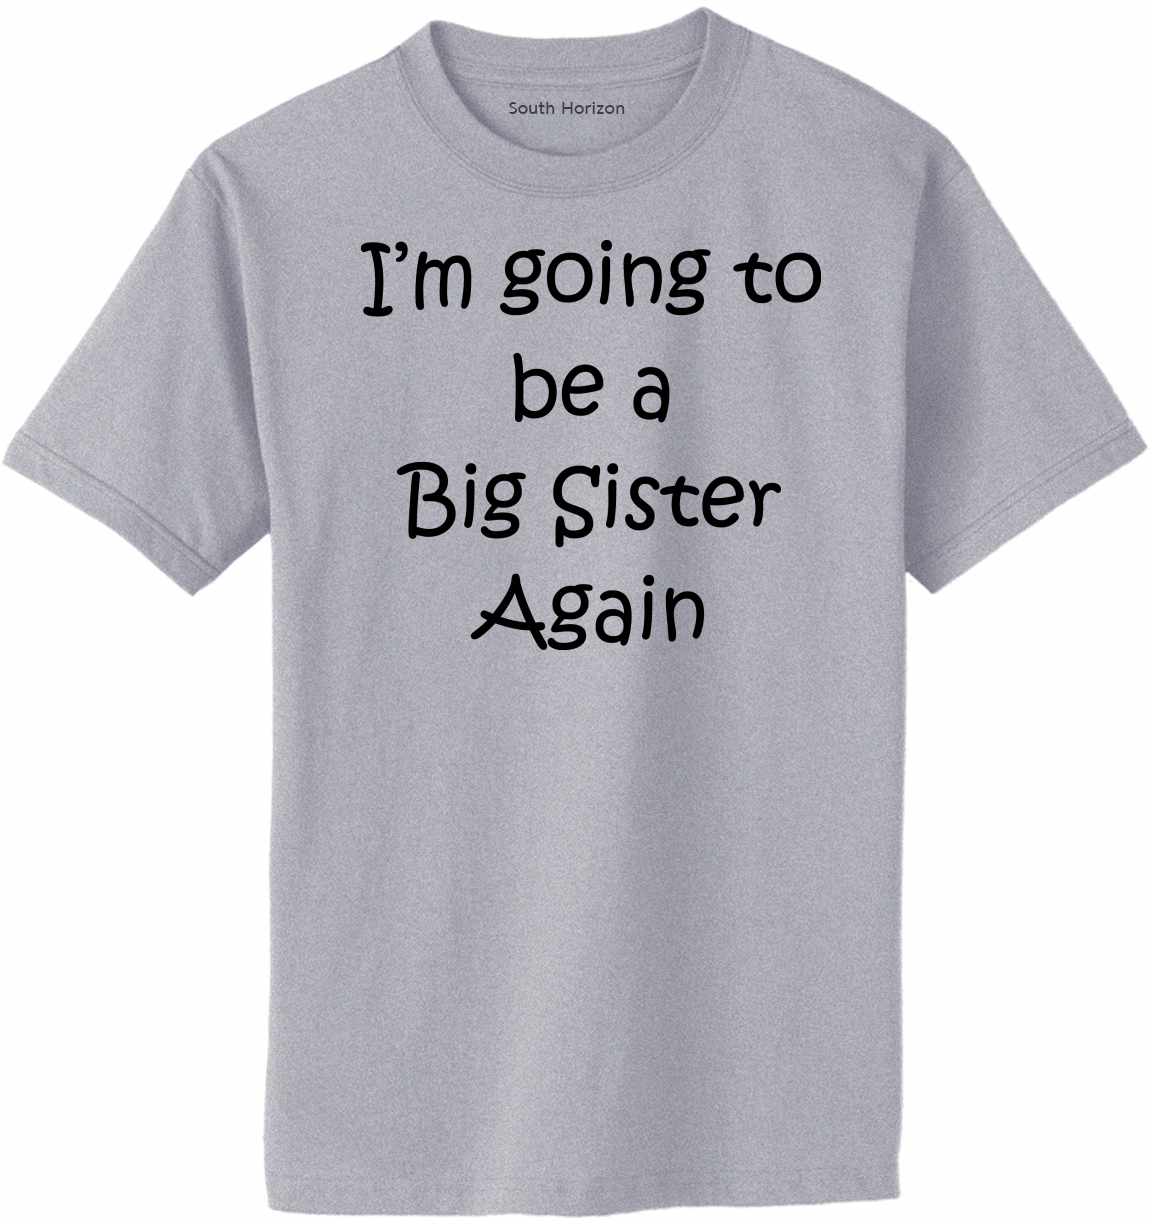 I'm Going to be a Big Sister Again Adult T-Shirt (#814-1)